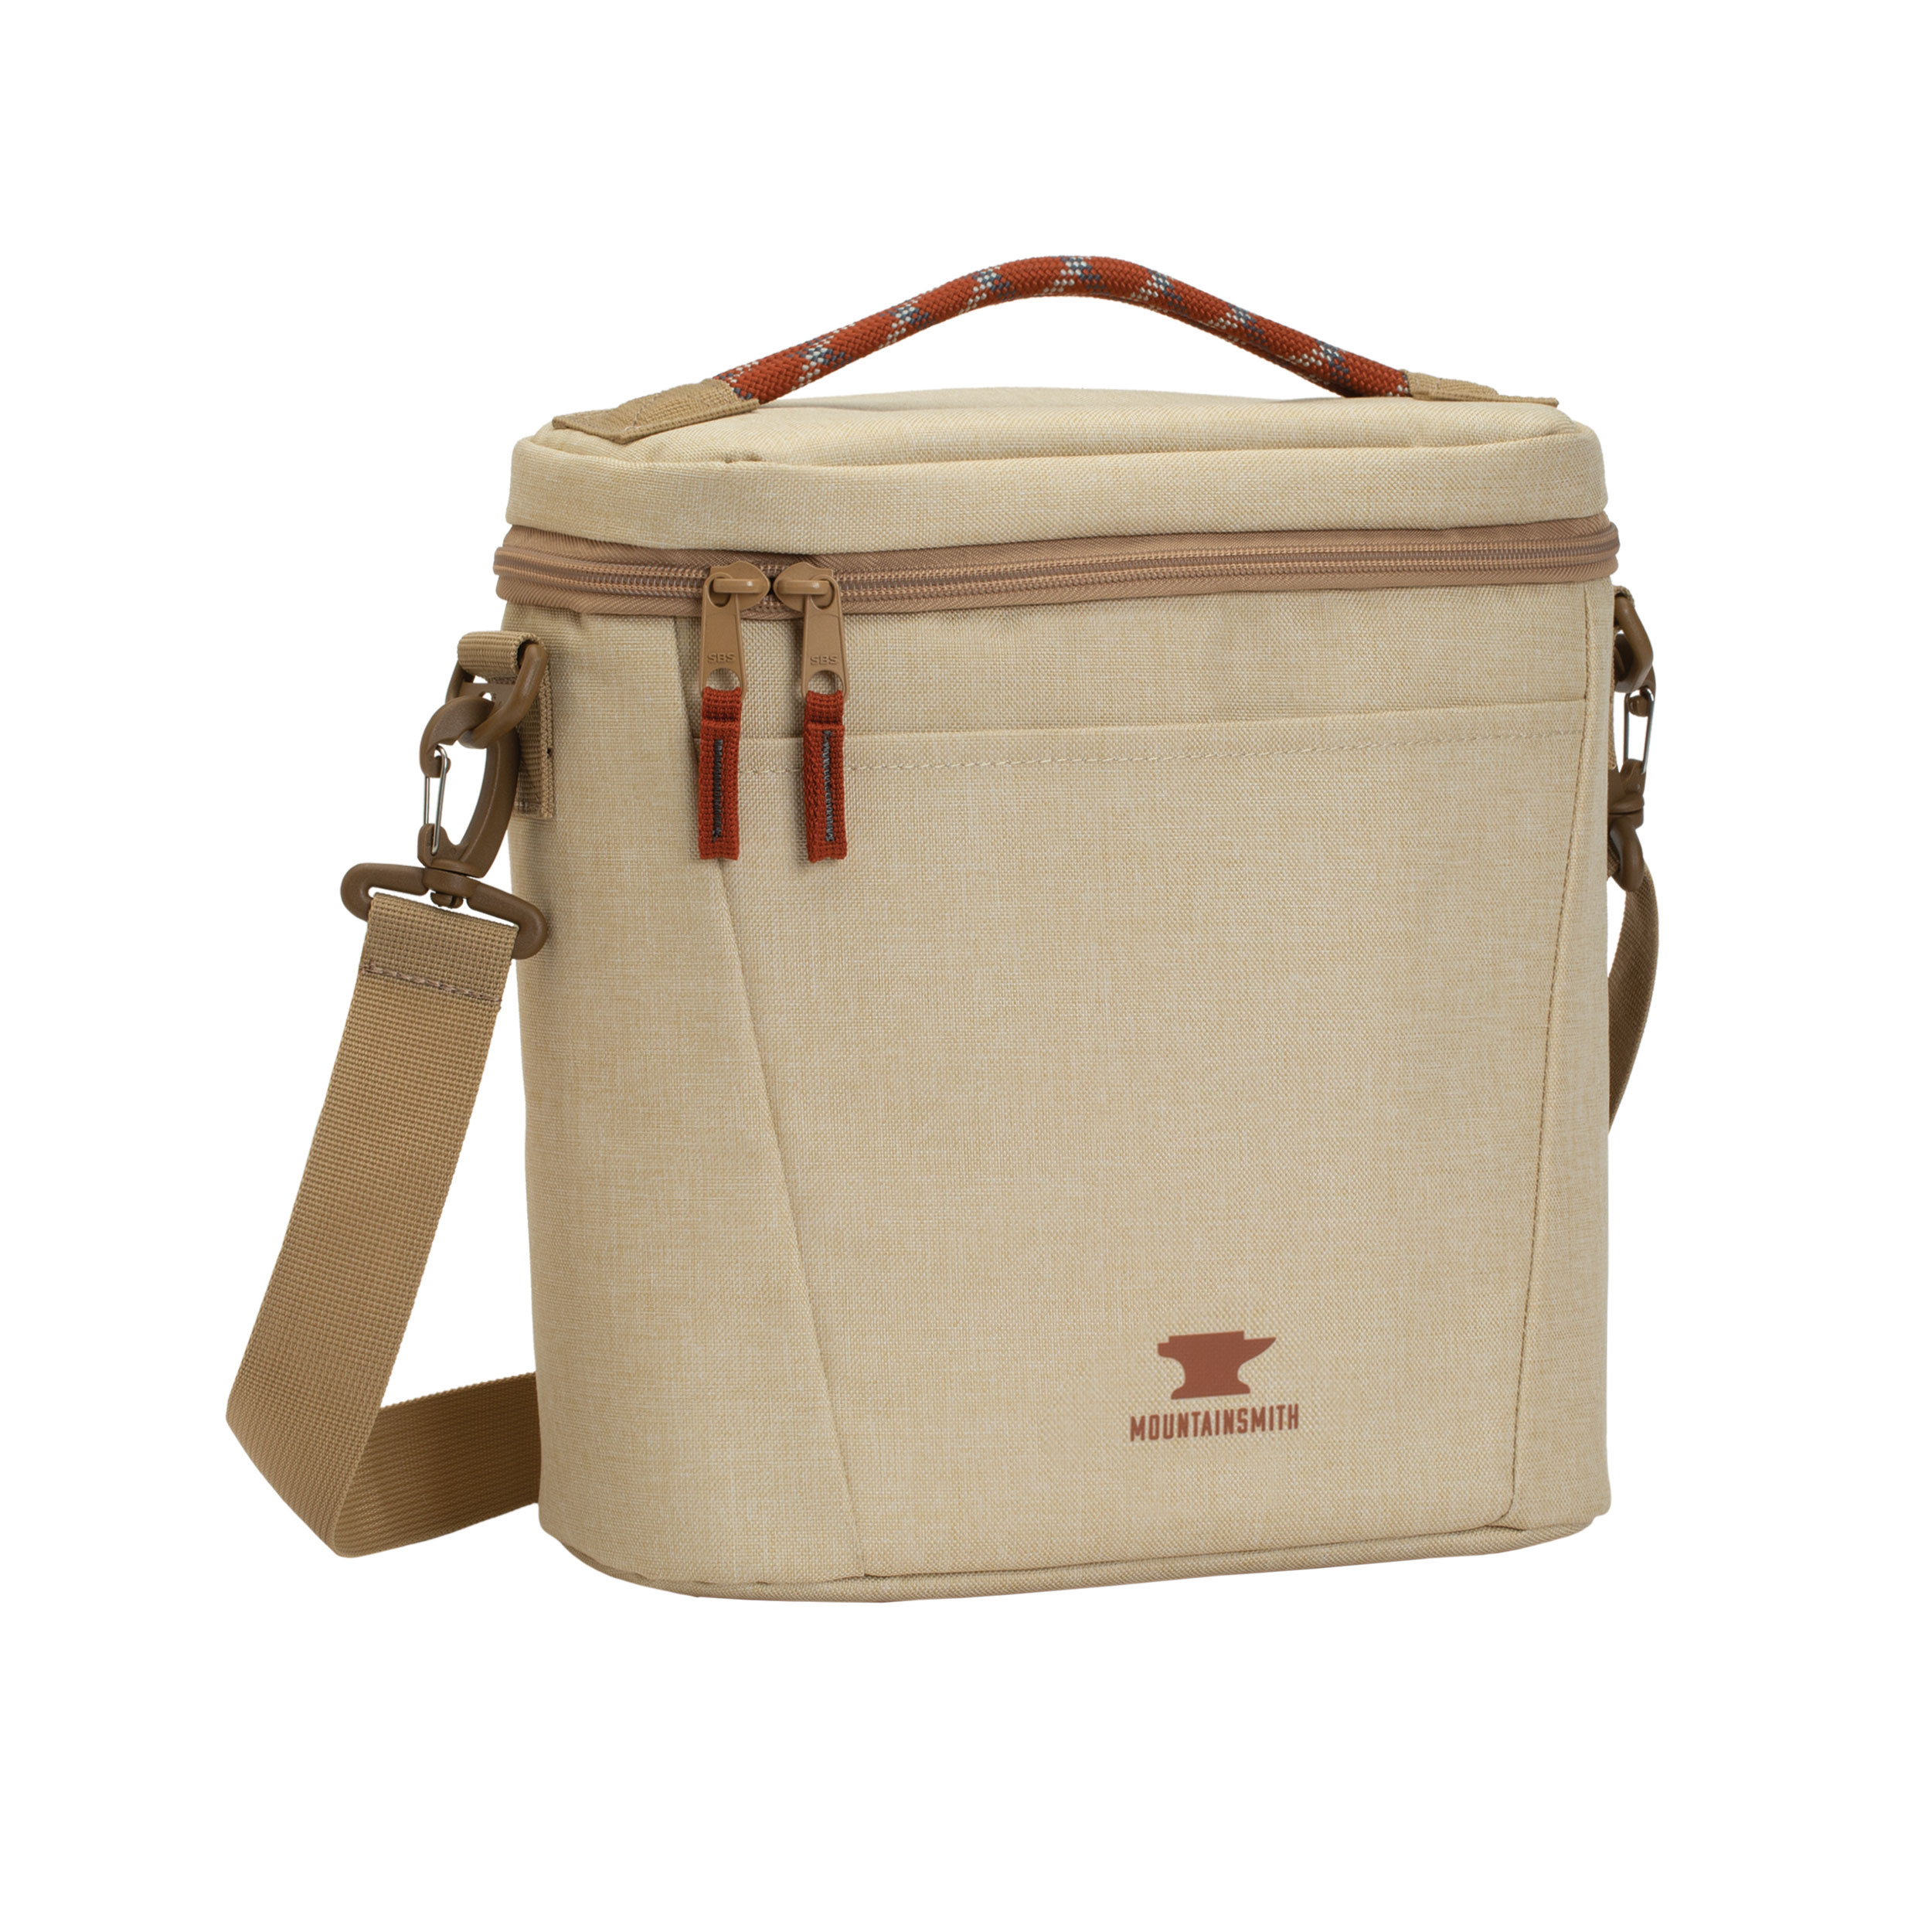 Mountainsmith The Sixer Cooler, Light Sand